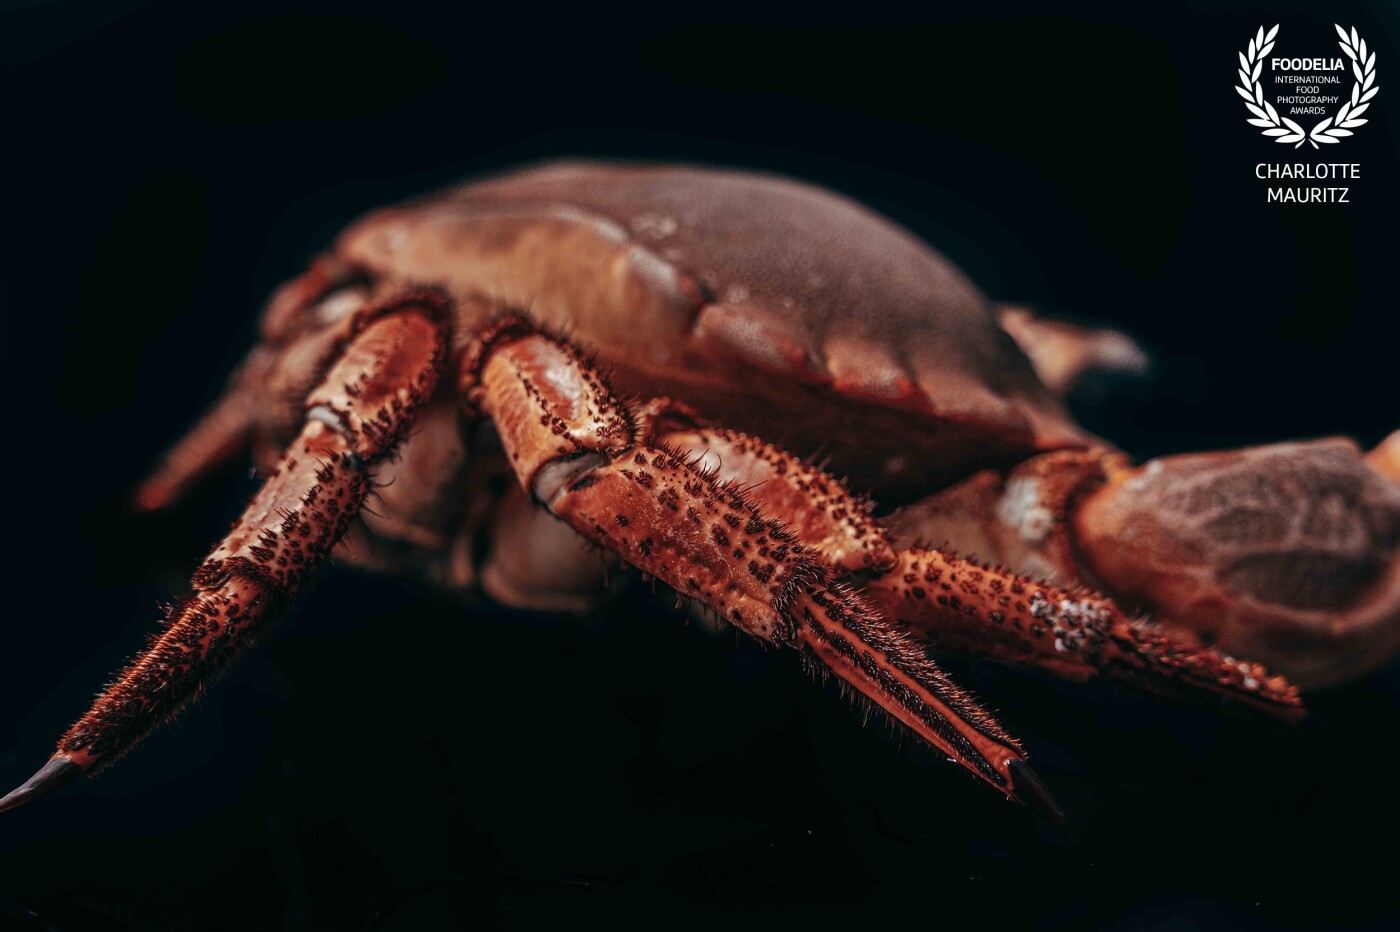 This picture is a close up of the legs from the brown crab. The focus makes this picture for me very fascinating. I love to make pictures of seafood animals and this crab is definitely one of my favorite models.